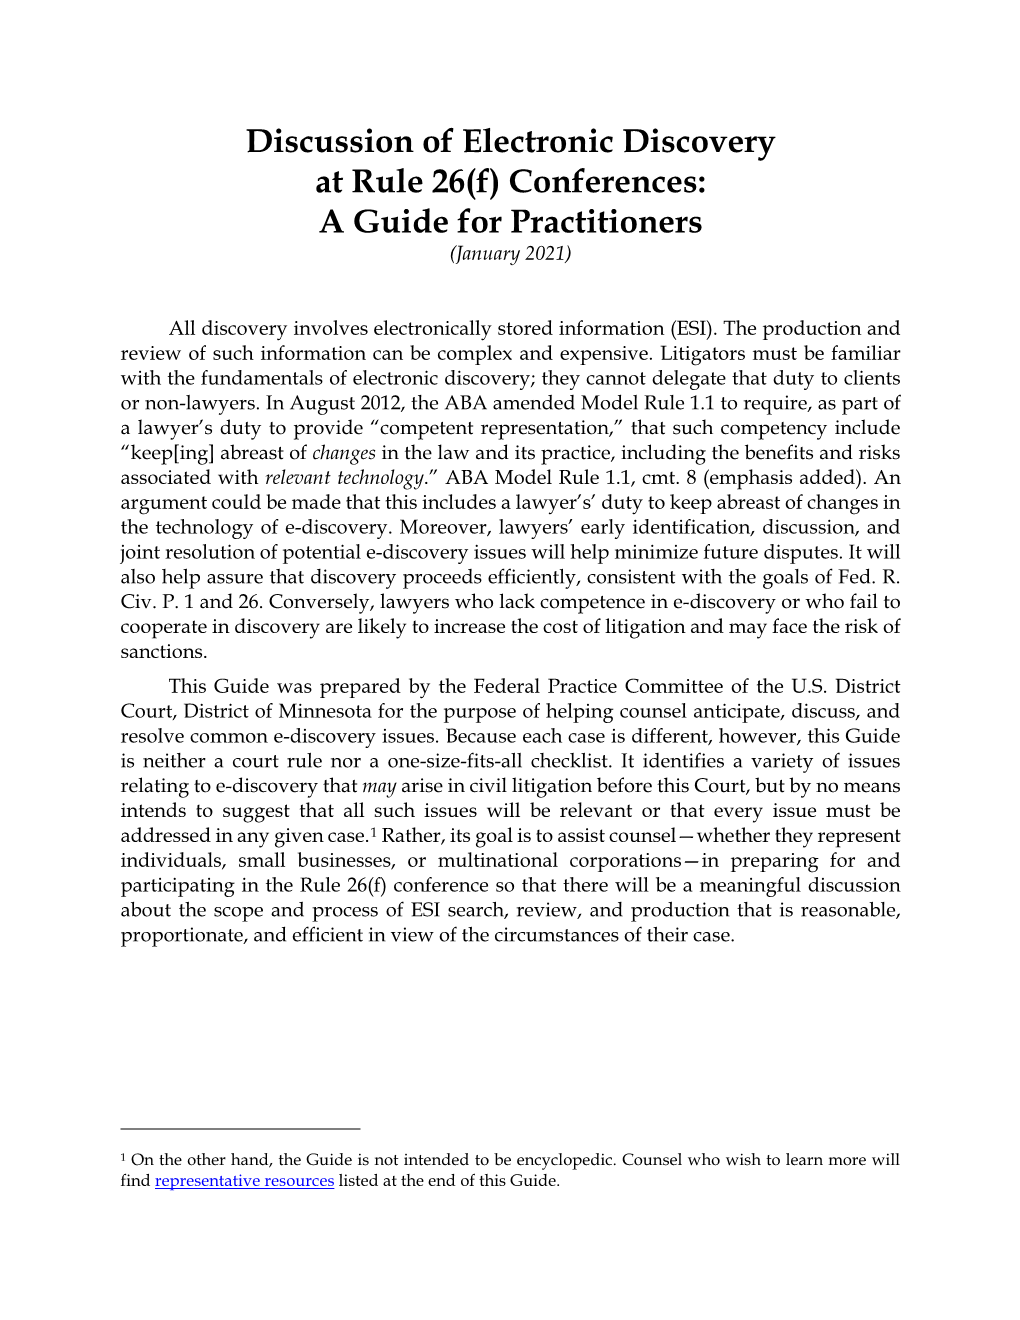 Discussion of Electronic Discovery at Rule 26(F) Conferences: a Guide for Practitioners (January 2021)